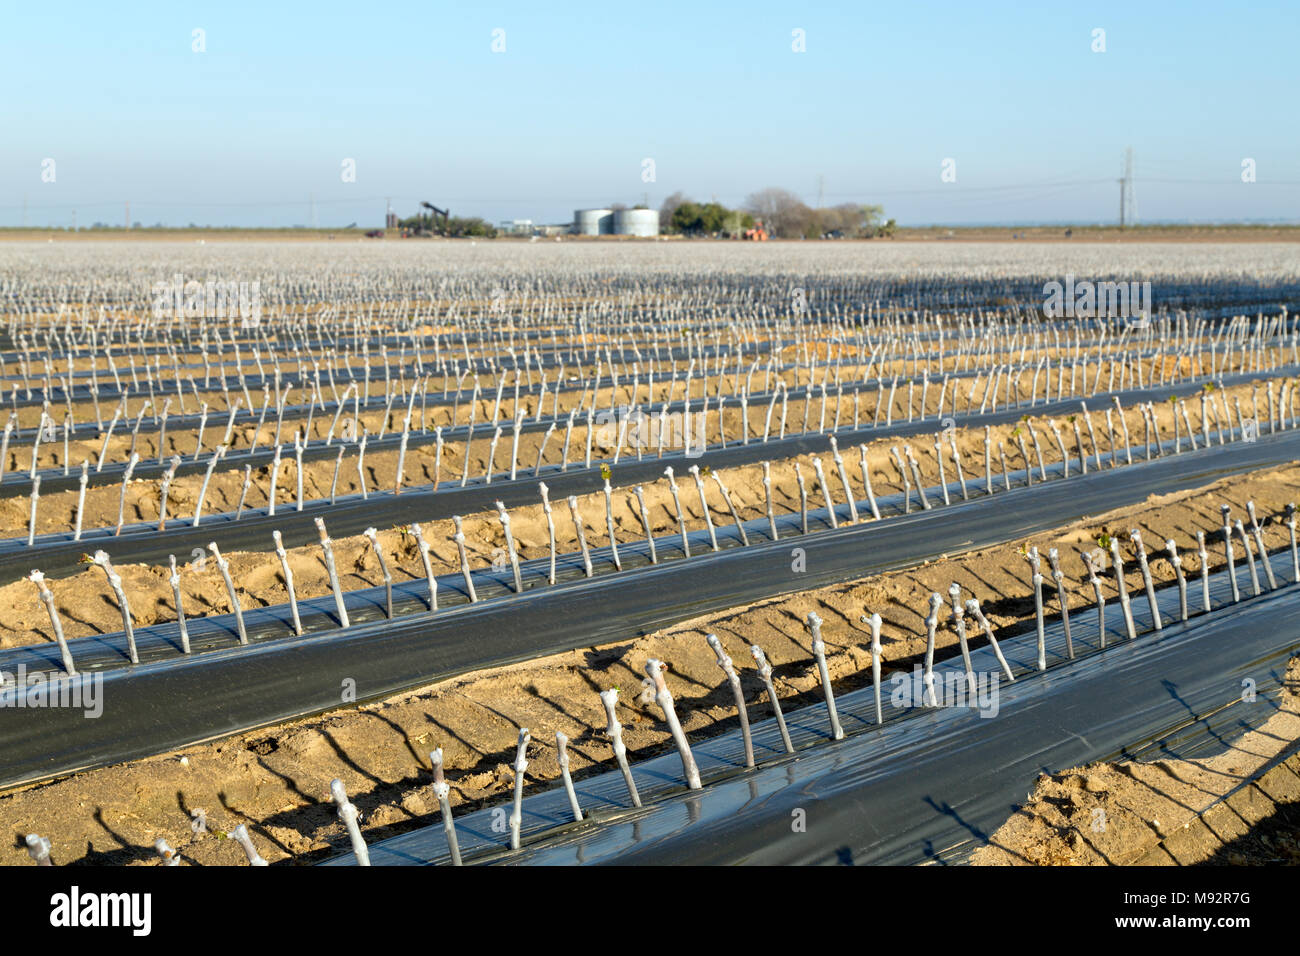 Rows of grafted & waxed grape cuttings planted in field. Stock Photo